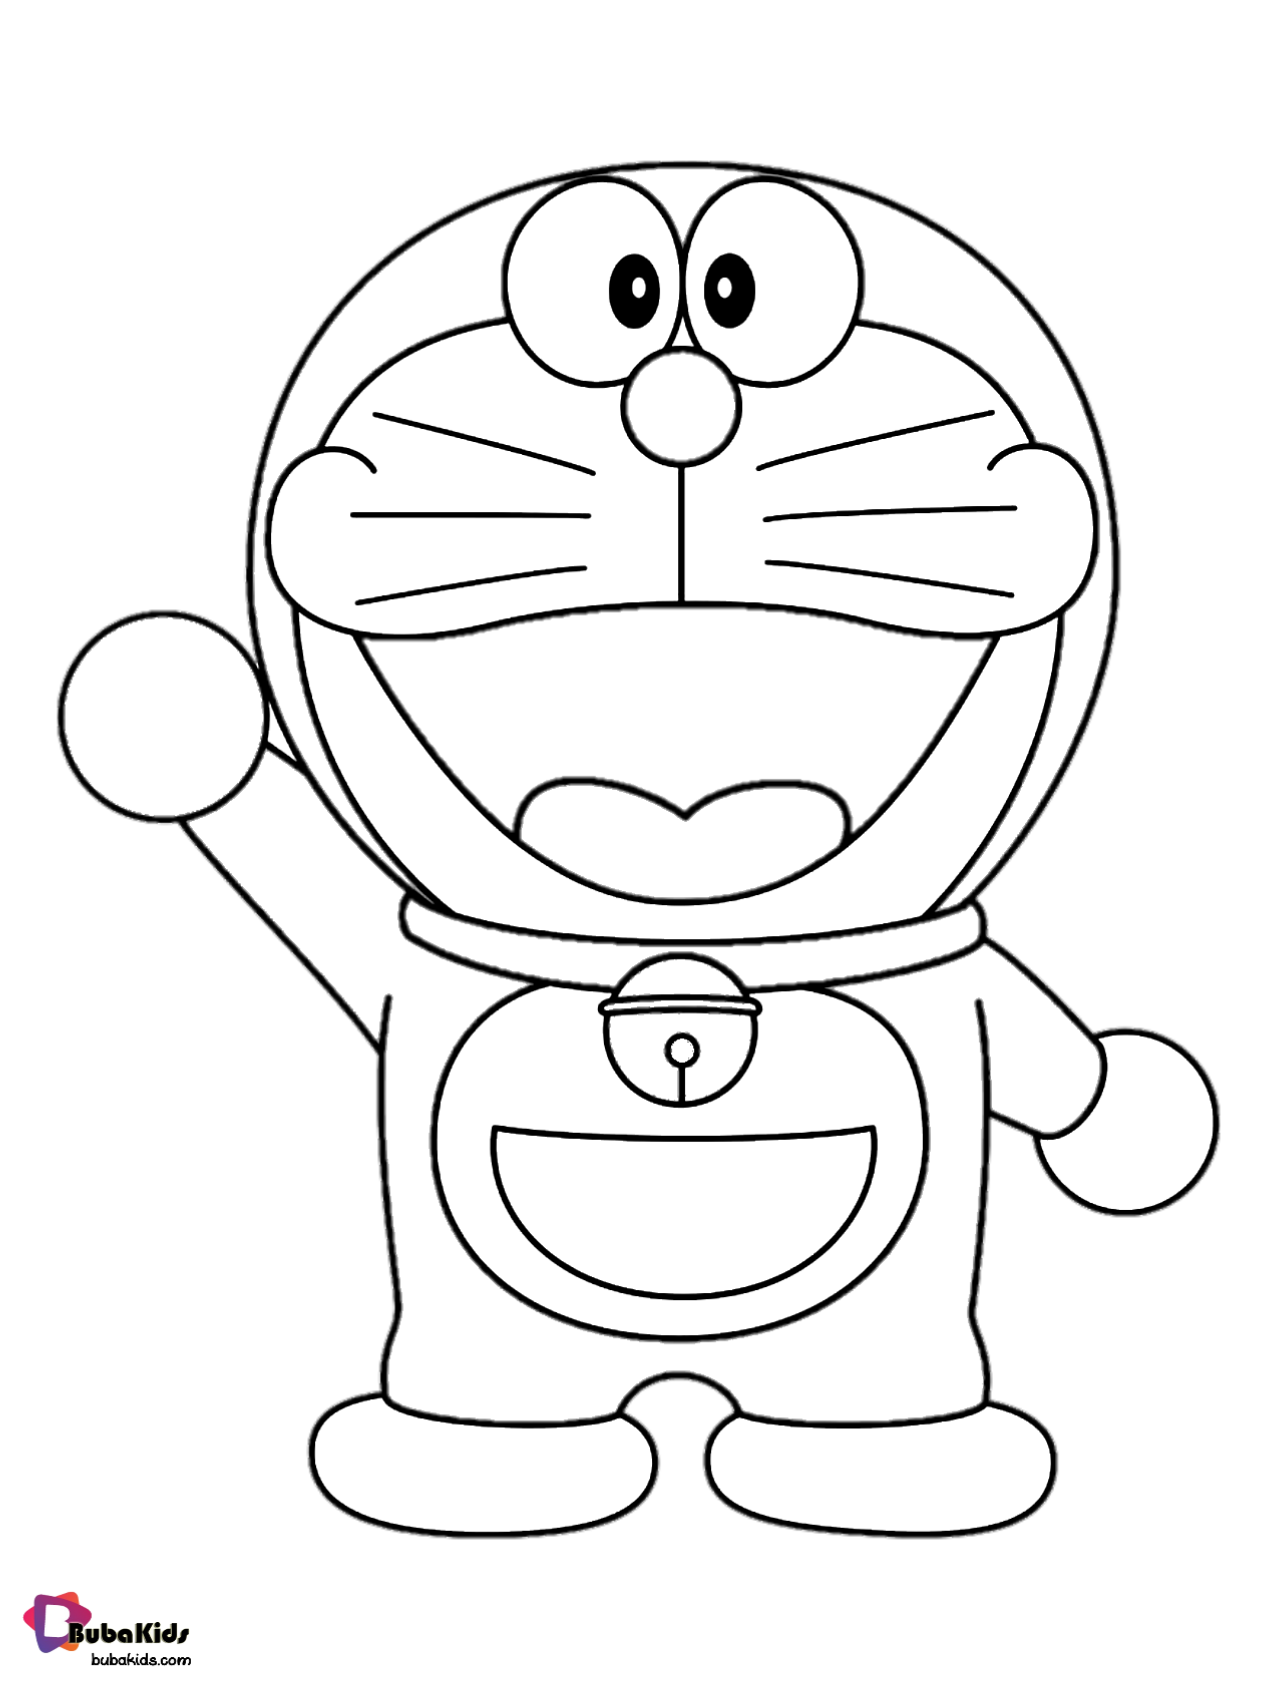 Doraemon Gadget Cat from Future coloring page. Wallpaper